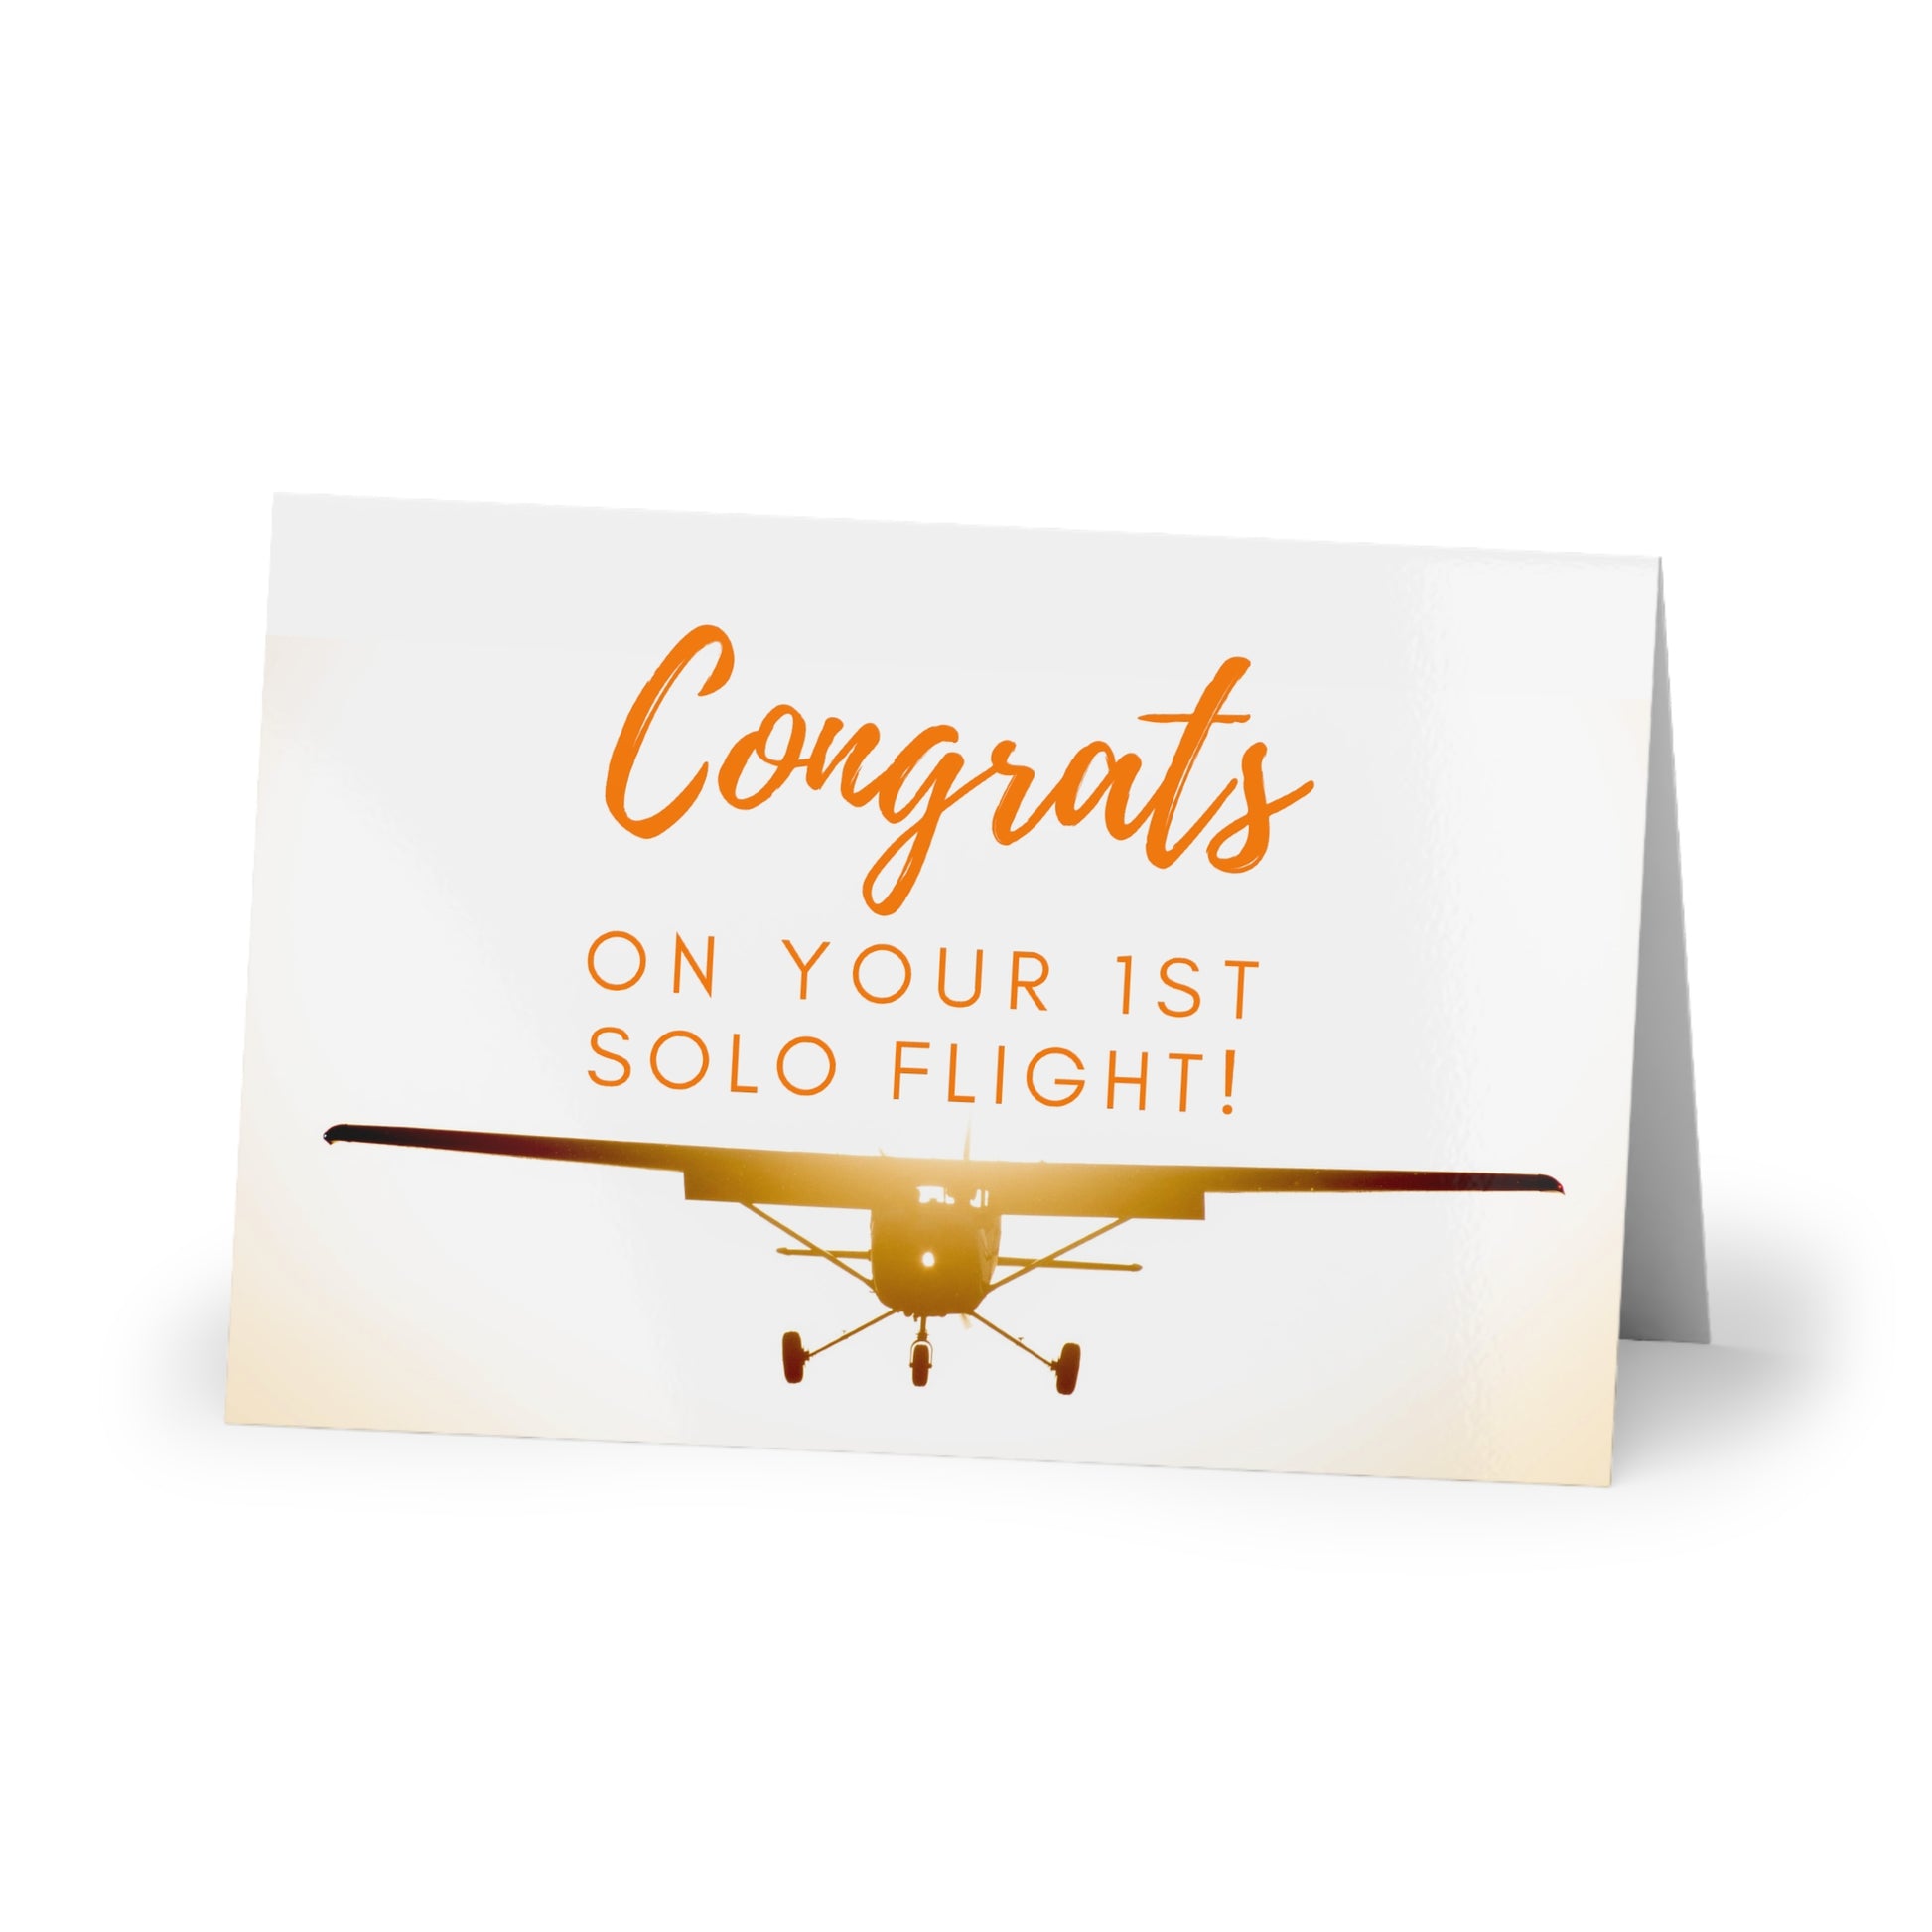 Congrats on your 1st Solo Flight! pack of 10 postcards (sunset)